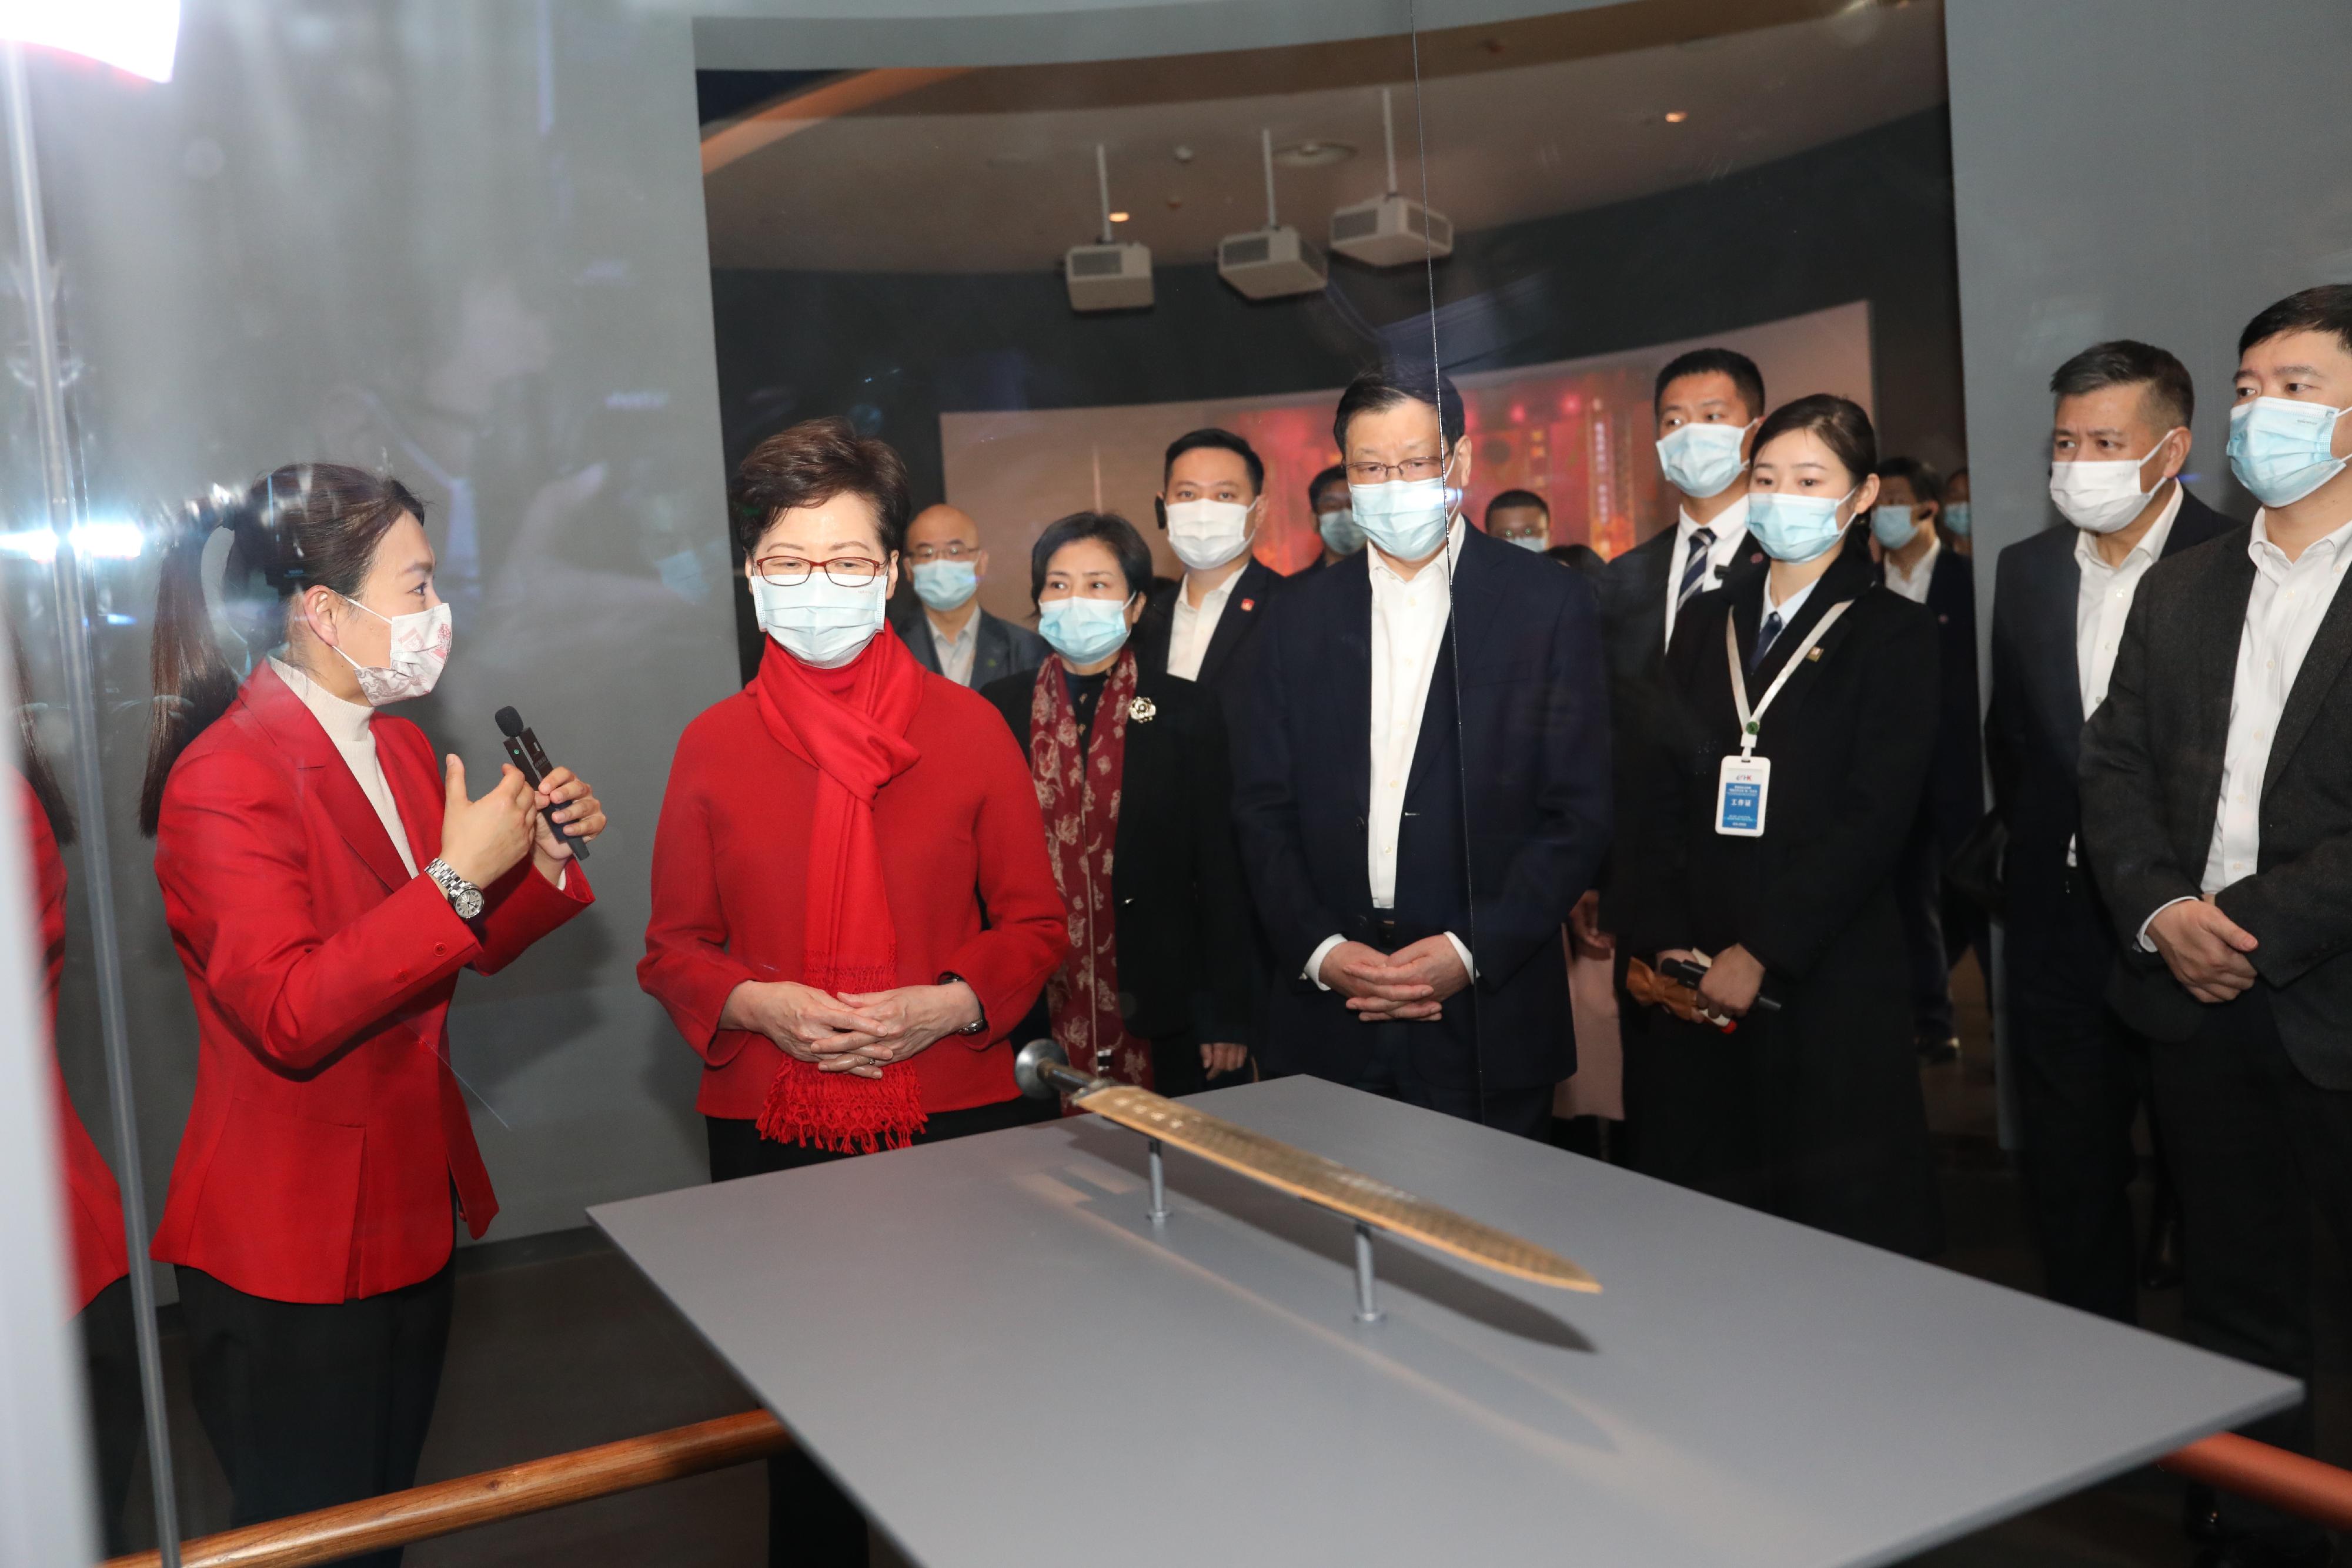 The Chief Executive, Mrs Carrie Lam, visited the new exhibition hall of the Hubei Provincial Museum in Wuhan today (November 30). Photo shows Mrs Lam (second left), accompanied by the Secretary of the CPC Hubei Provincial Committee, Mr Ying Yong (fifth right), viewing exhibits in the museum.